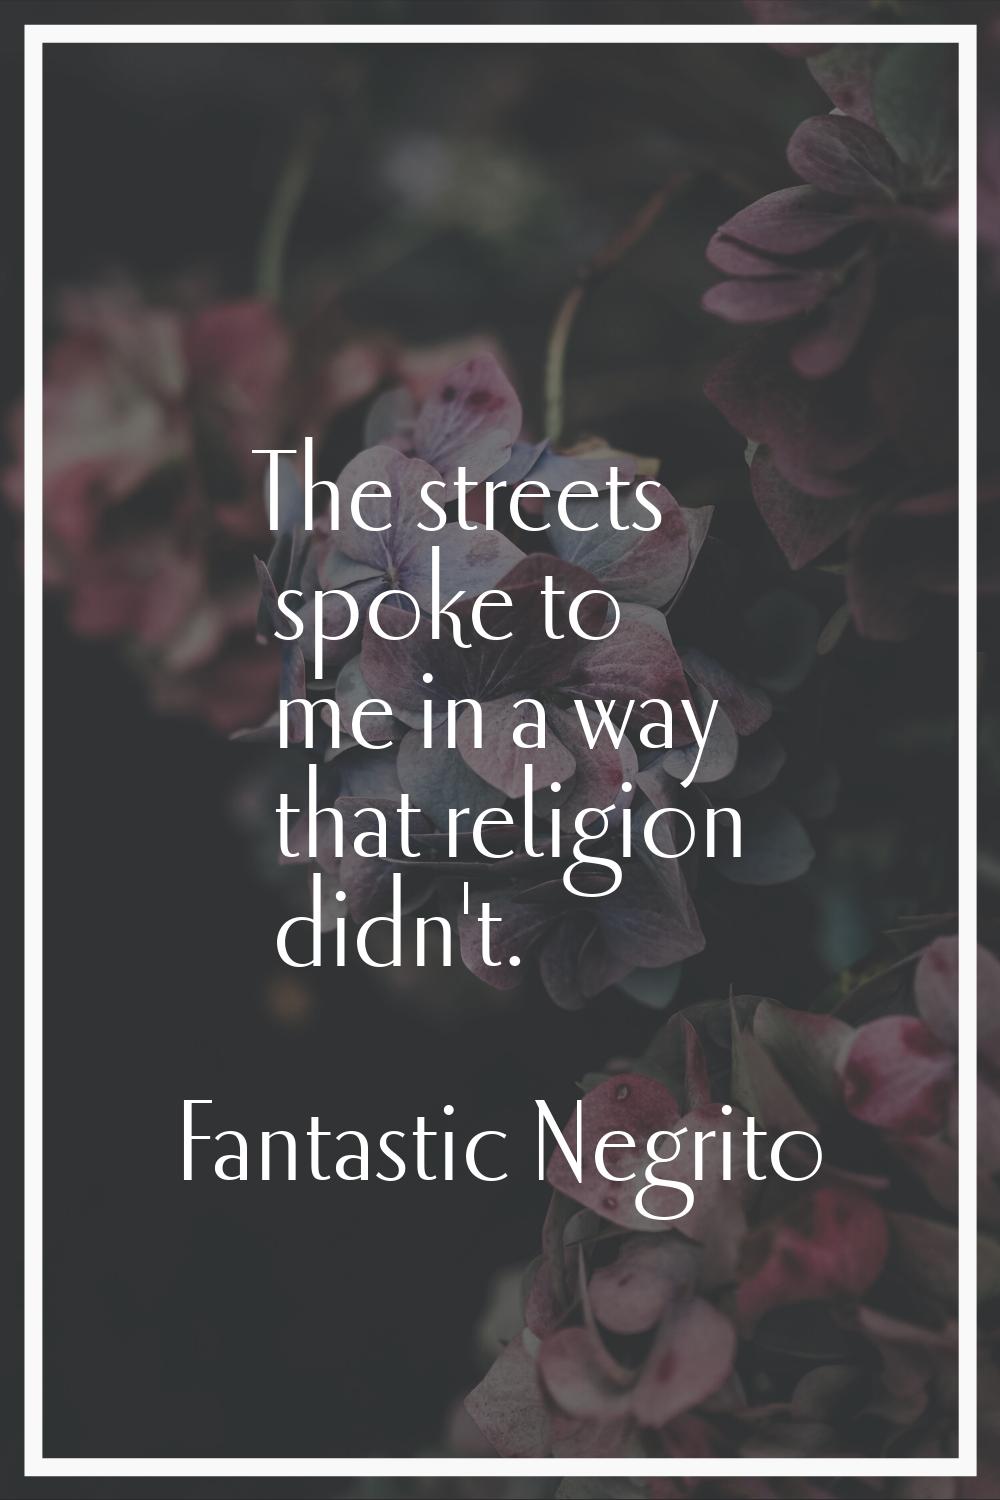 The streets spoke to me in a way that religion didn't.